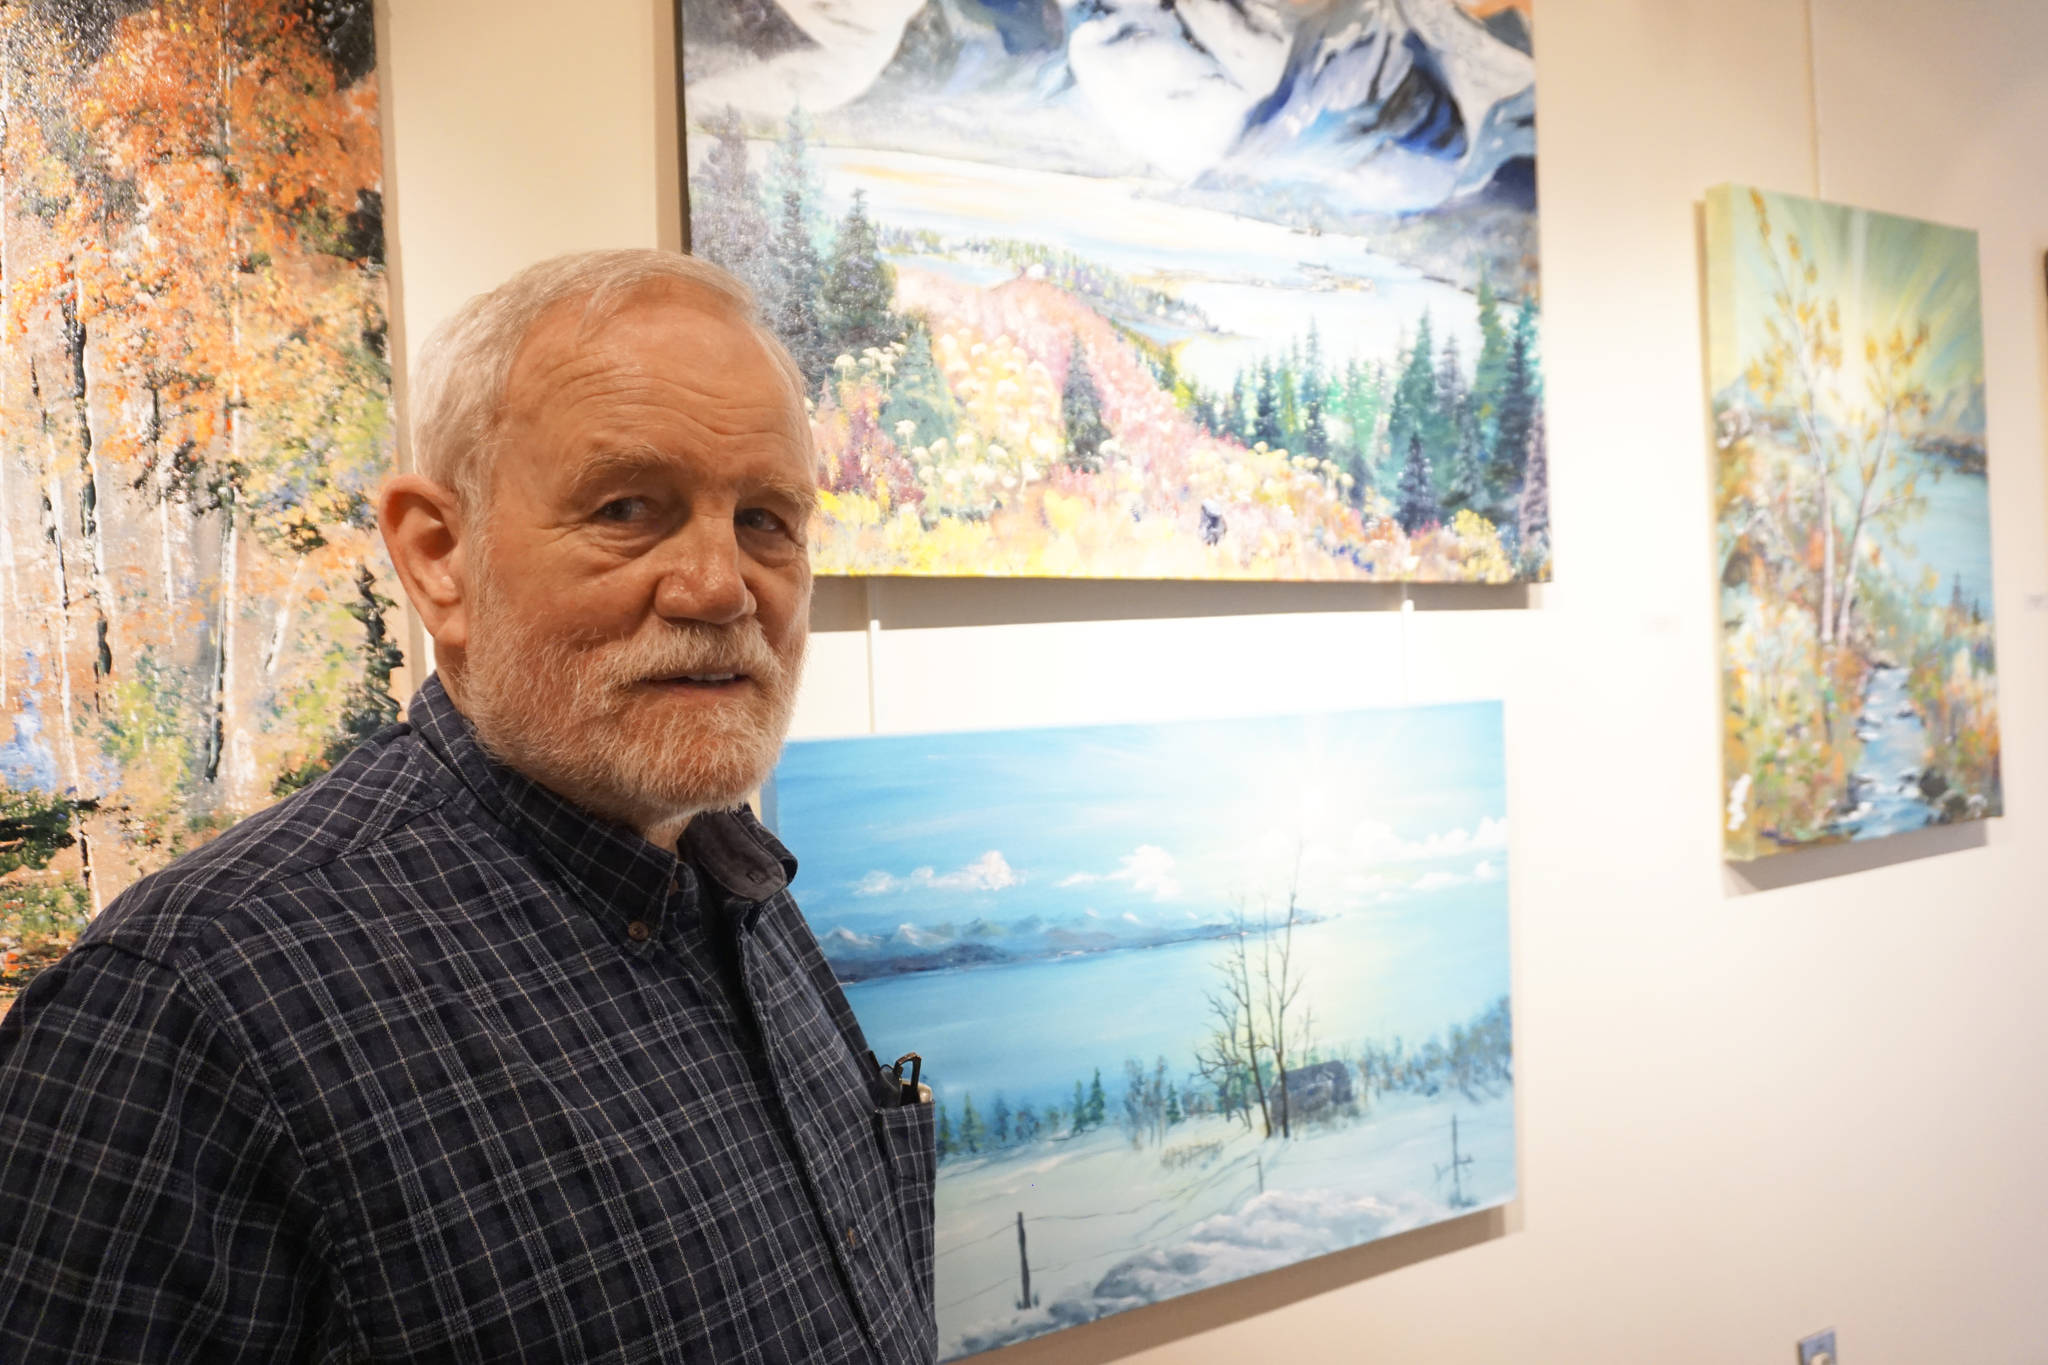 Bill Smith stands by a John Fenske painting, top, that his children bought for him. Fenske’s retrospective show opened on First Friday, April 5, 2019, at Kachemak Bay Campus in Homer, Alaska. (Photo by Michael Armstrong/Homer News)